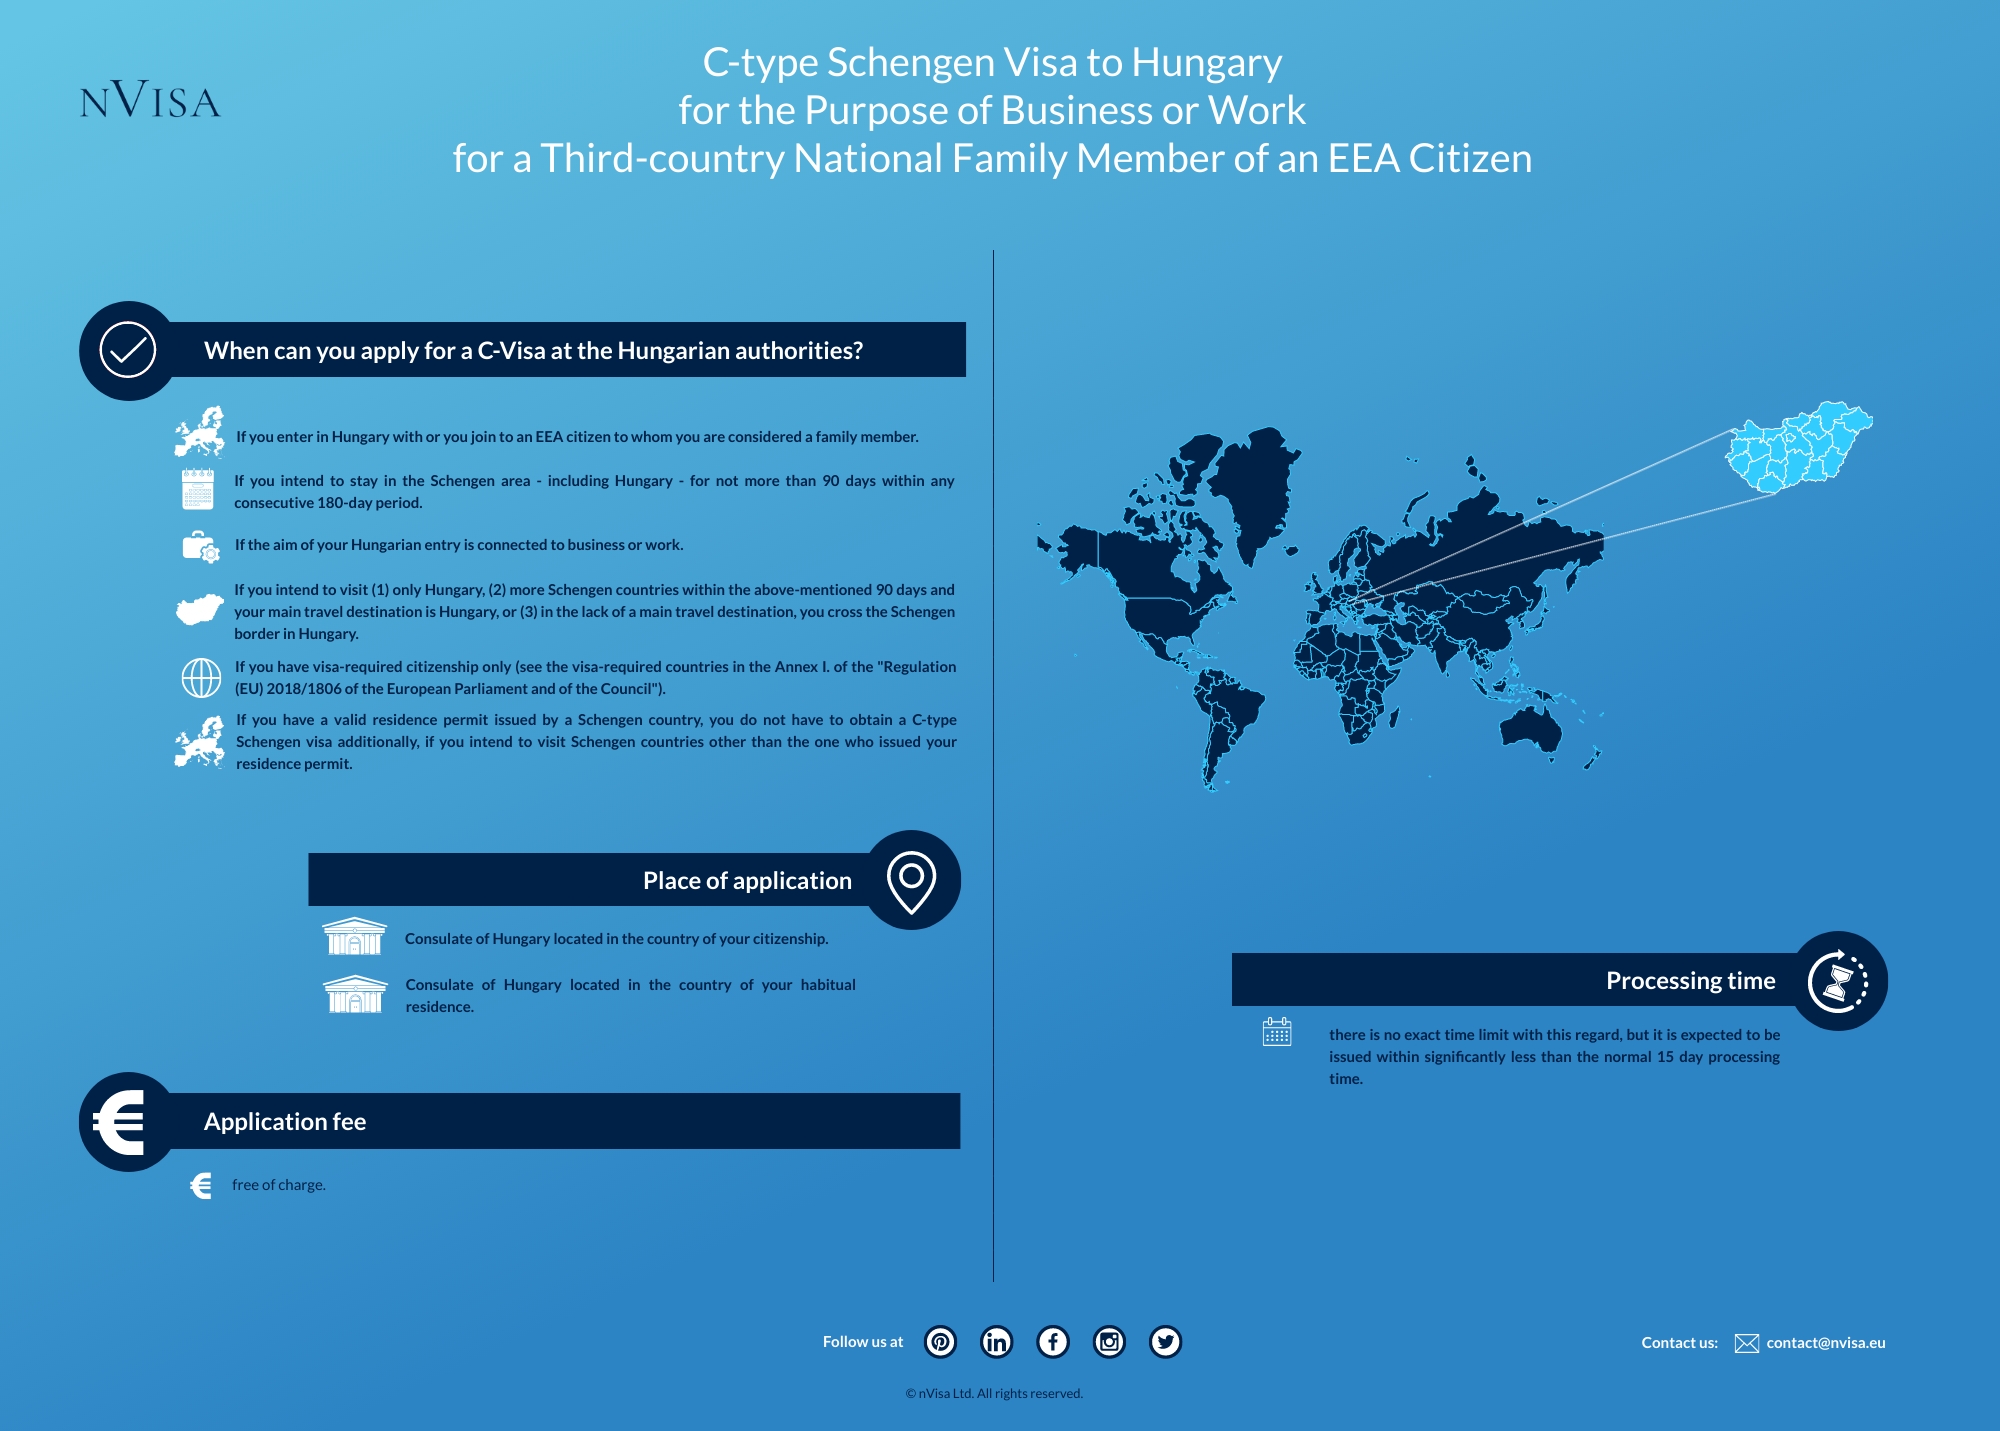 Infographic about immigration requirements and the details of obtaining a C-type Schengen Visa for the purpose of business or work in Hungary for a third-country national Family Member of an EEA Citizen.